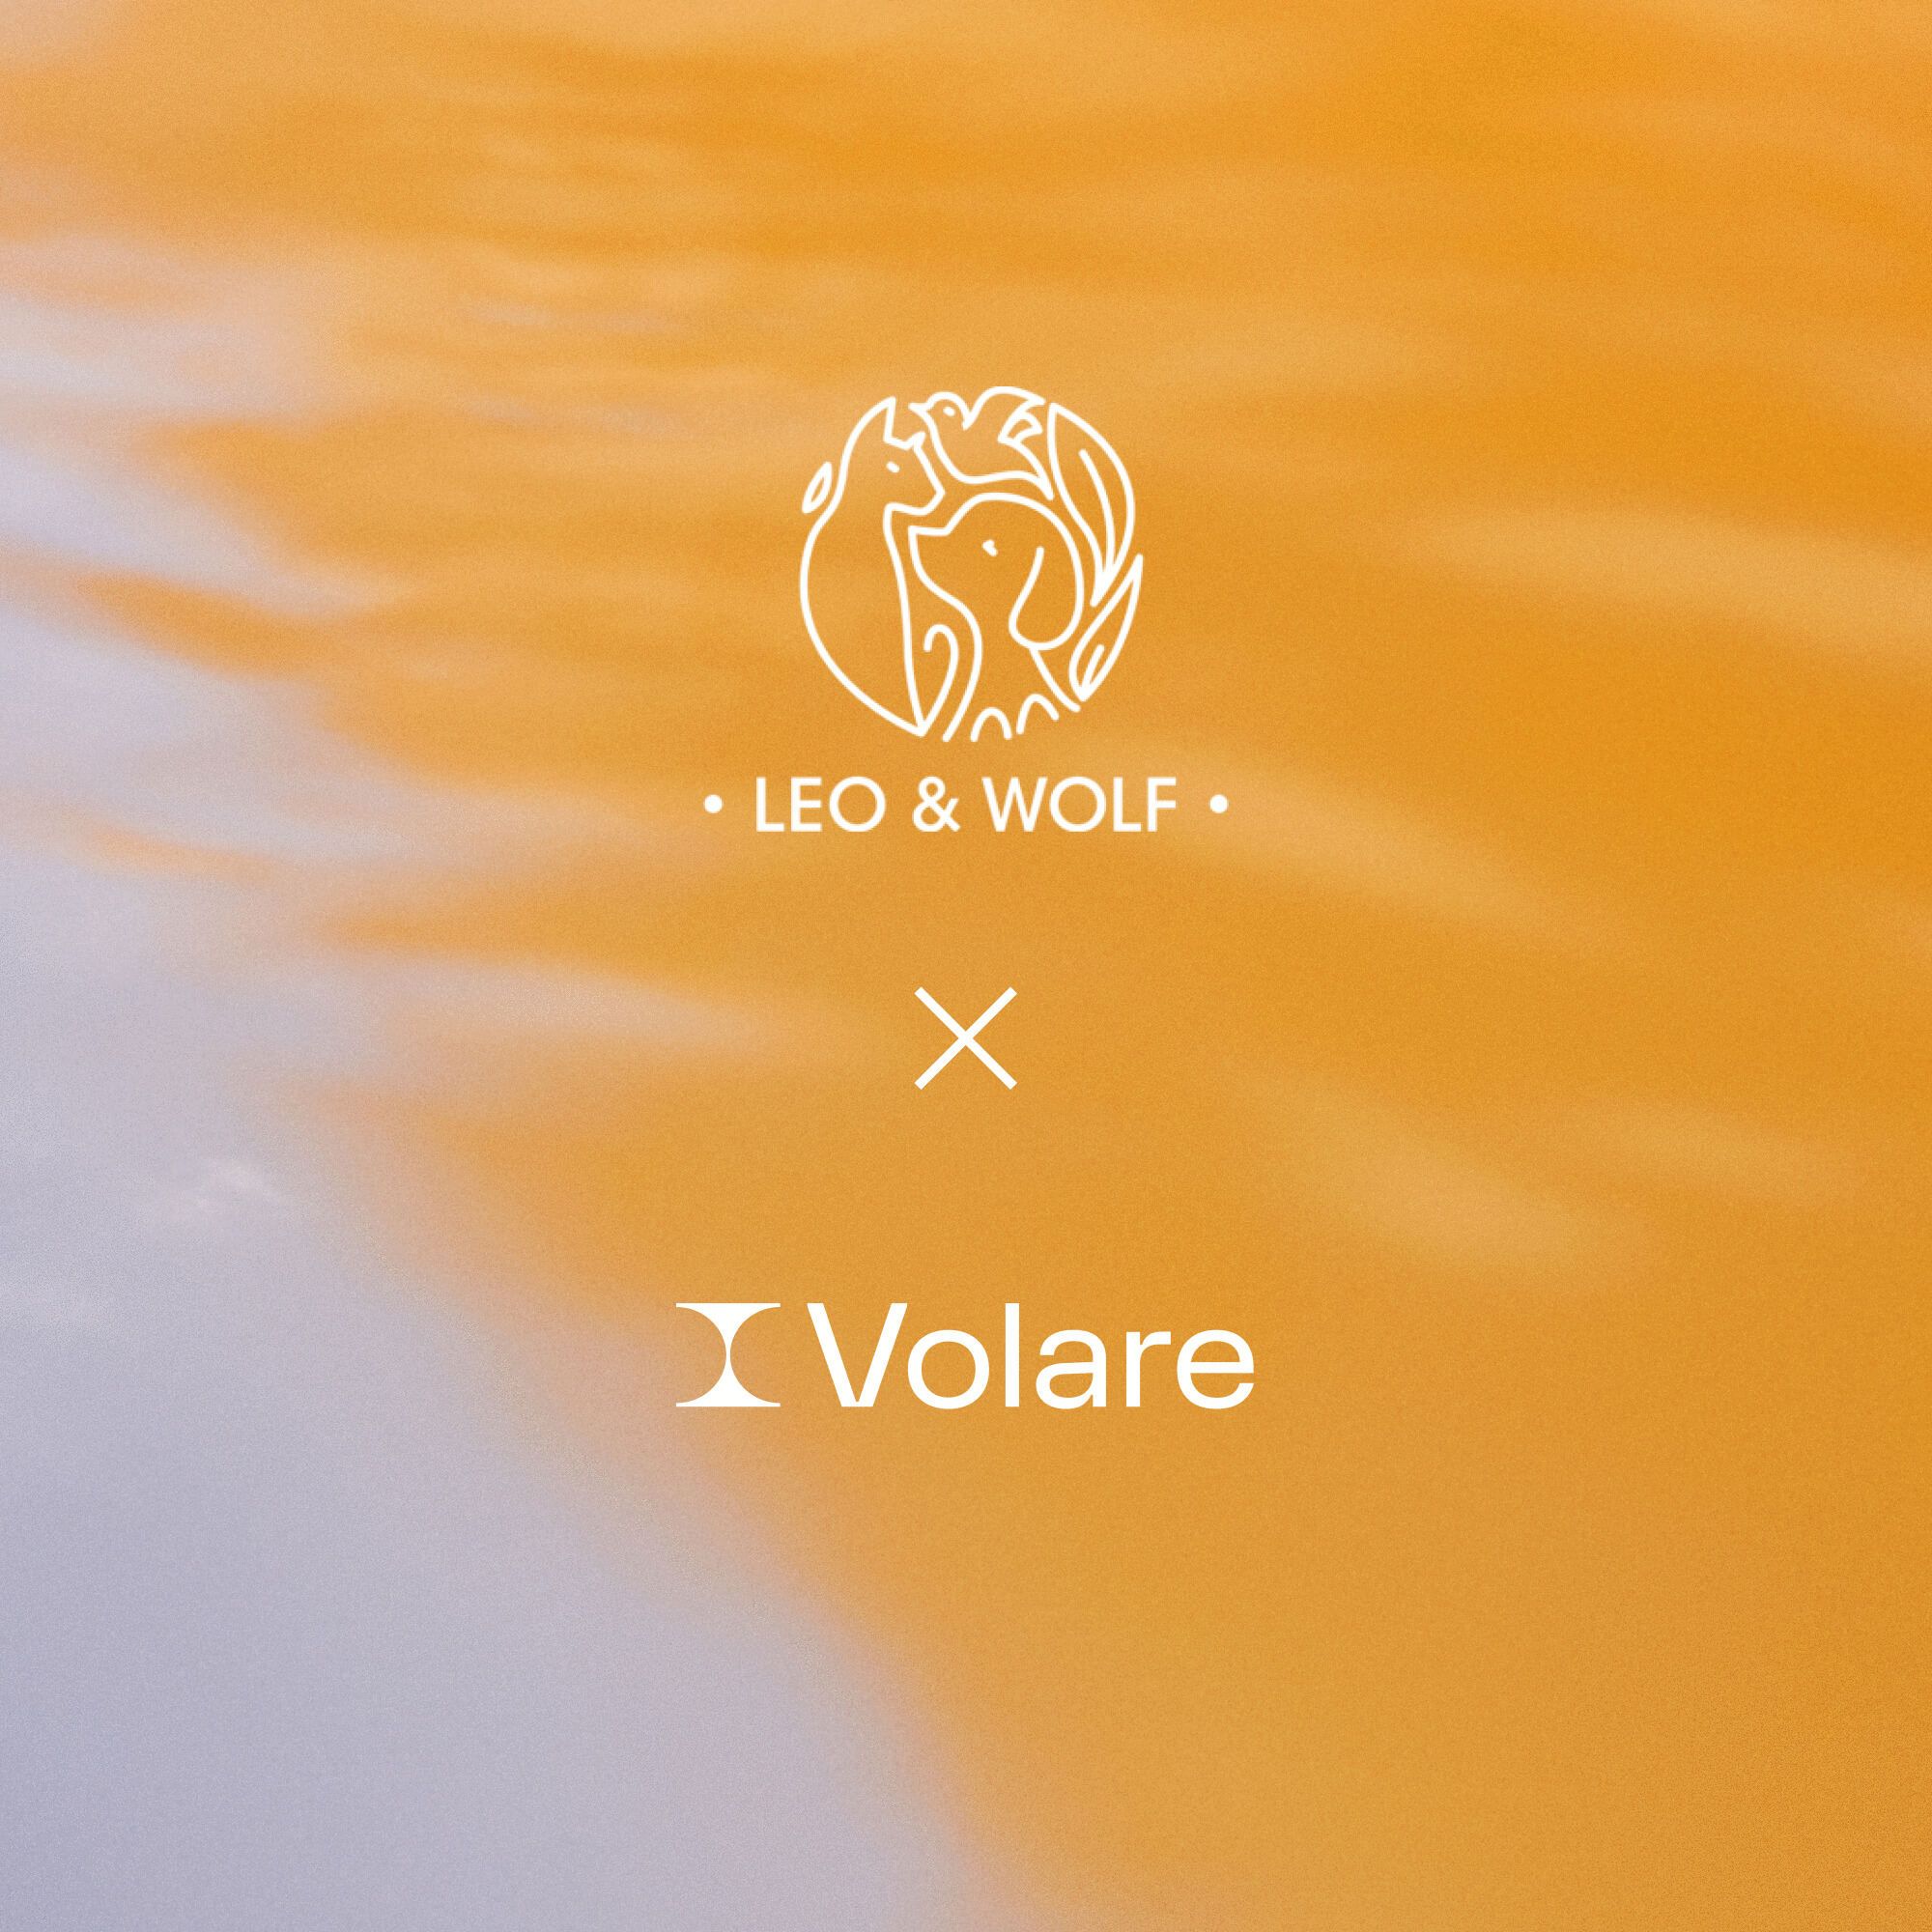 Leo Wolf and Volare logos on a blue and orange background